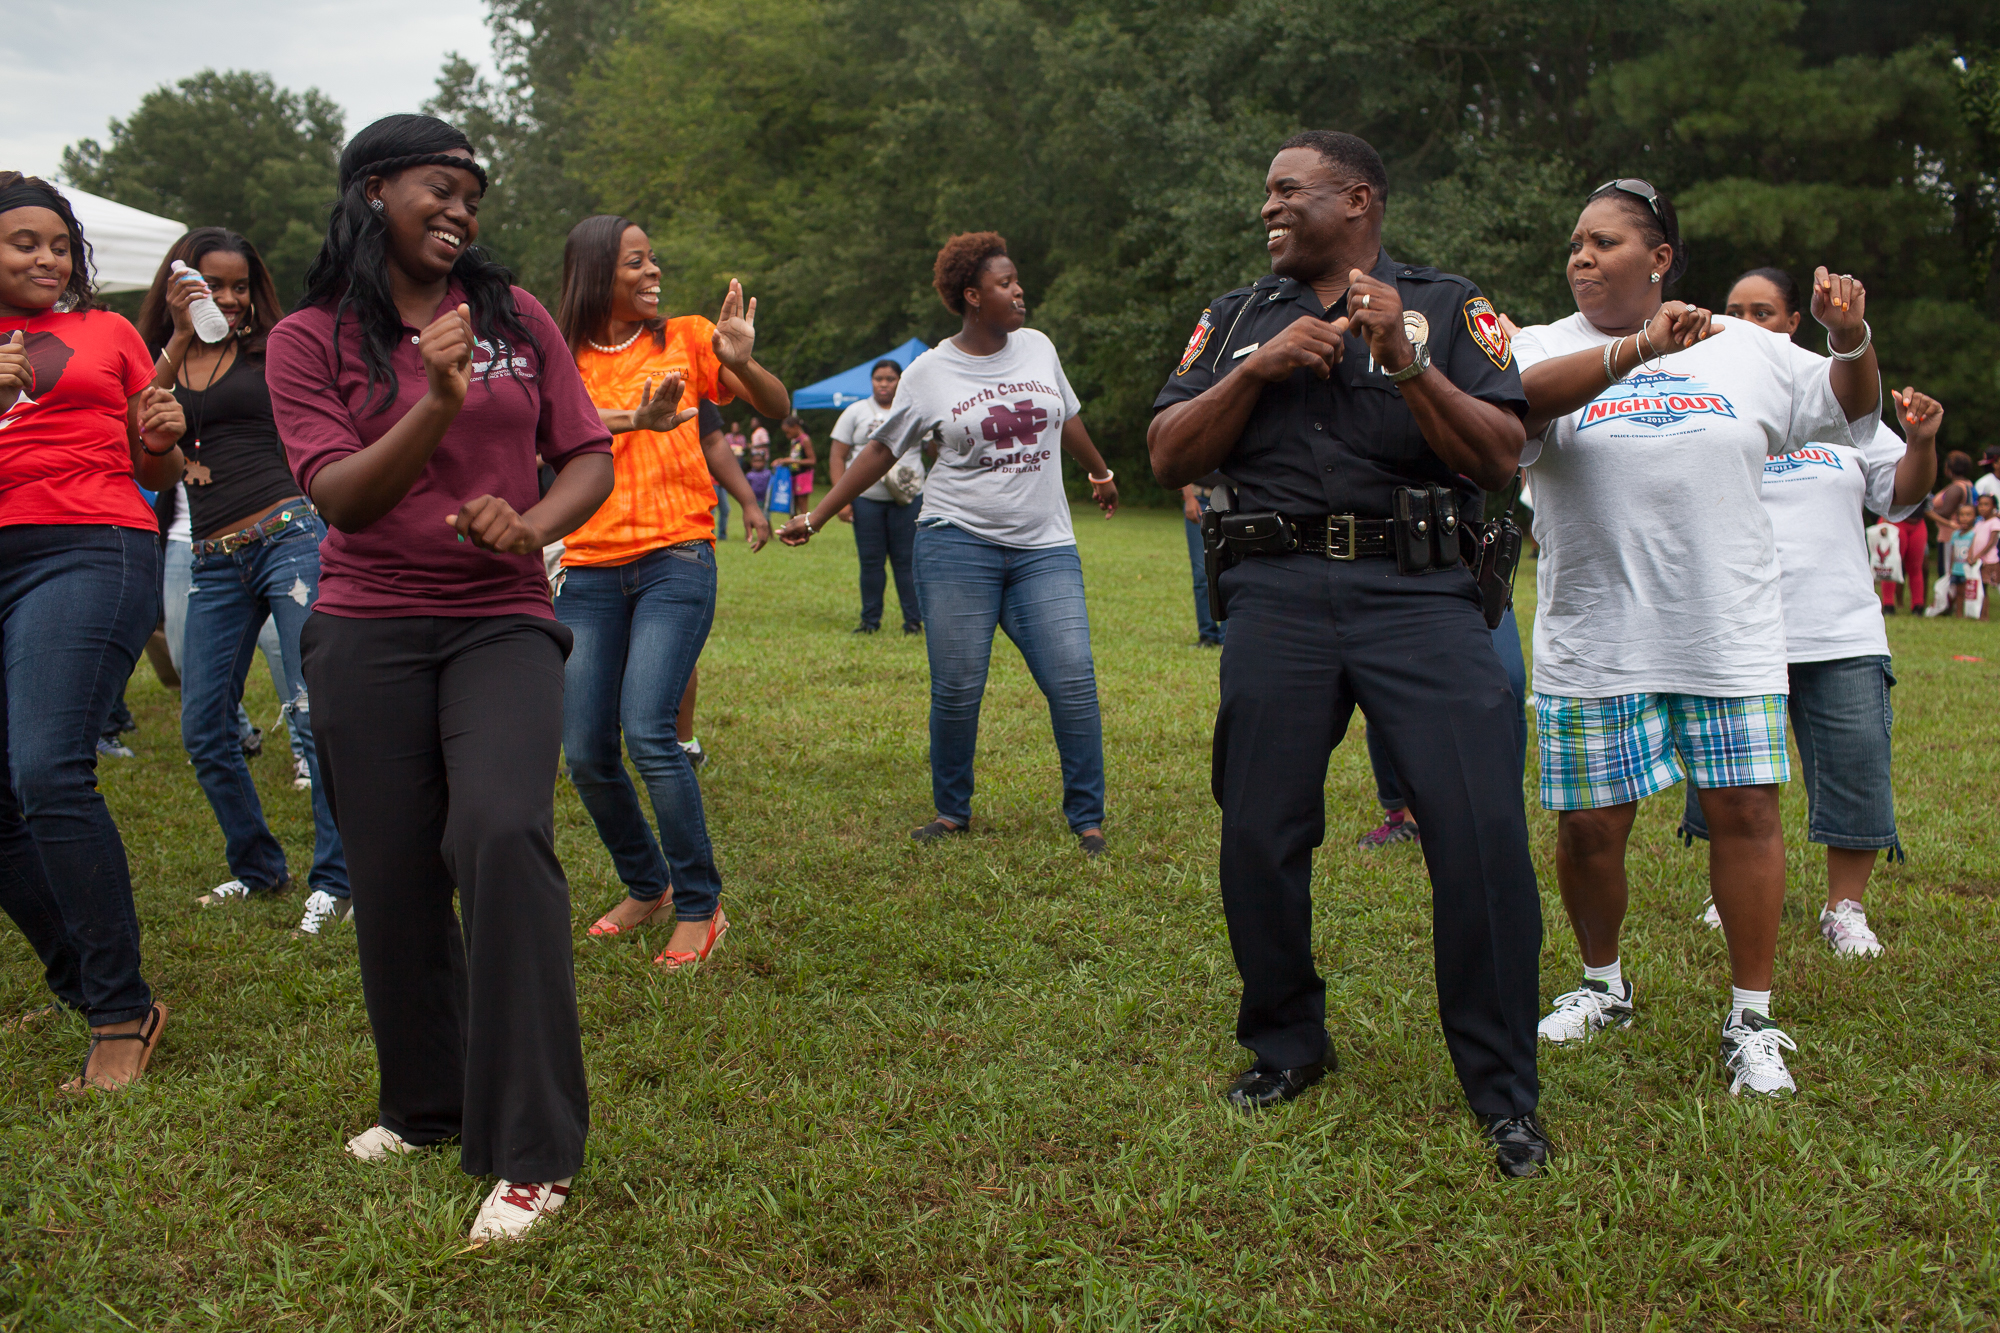  Durham Police officer R. Carson dances with members of North Carolina Central University’s step dance team during National Night Out near McDougald Terrace, a low-income public housing project where shootings have been frequent. National Night Out e